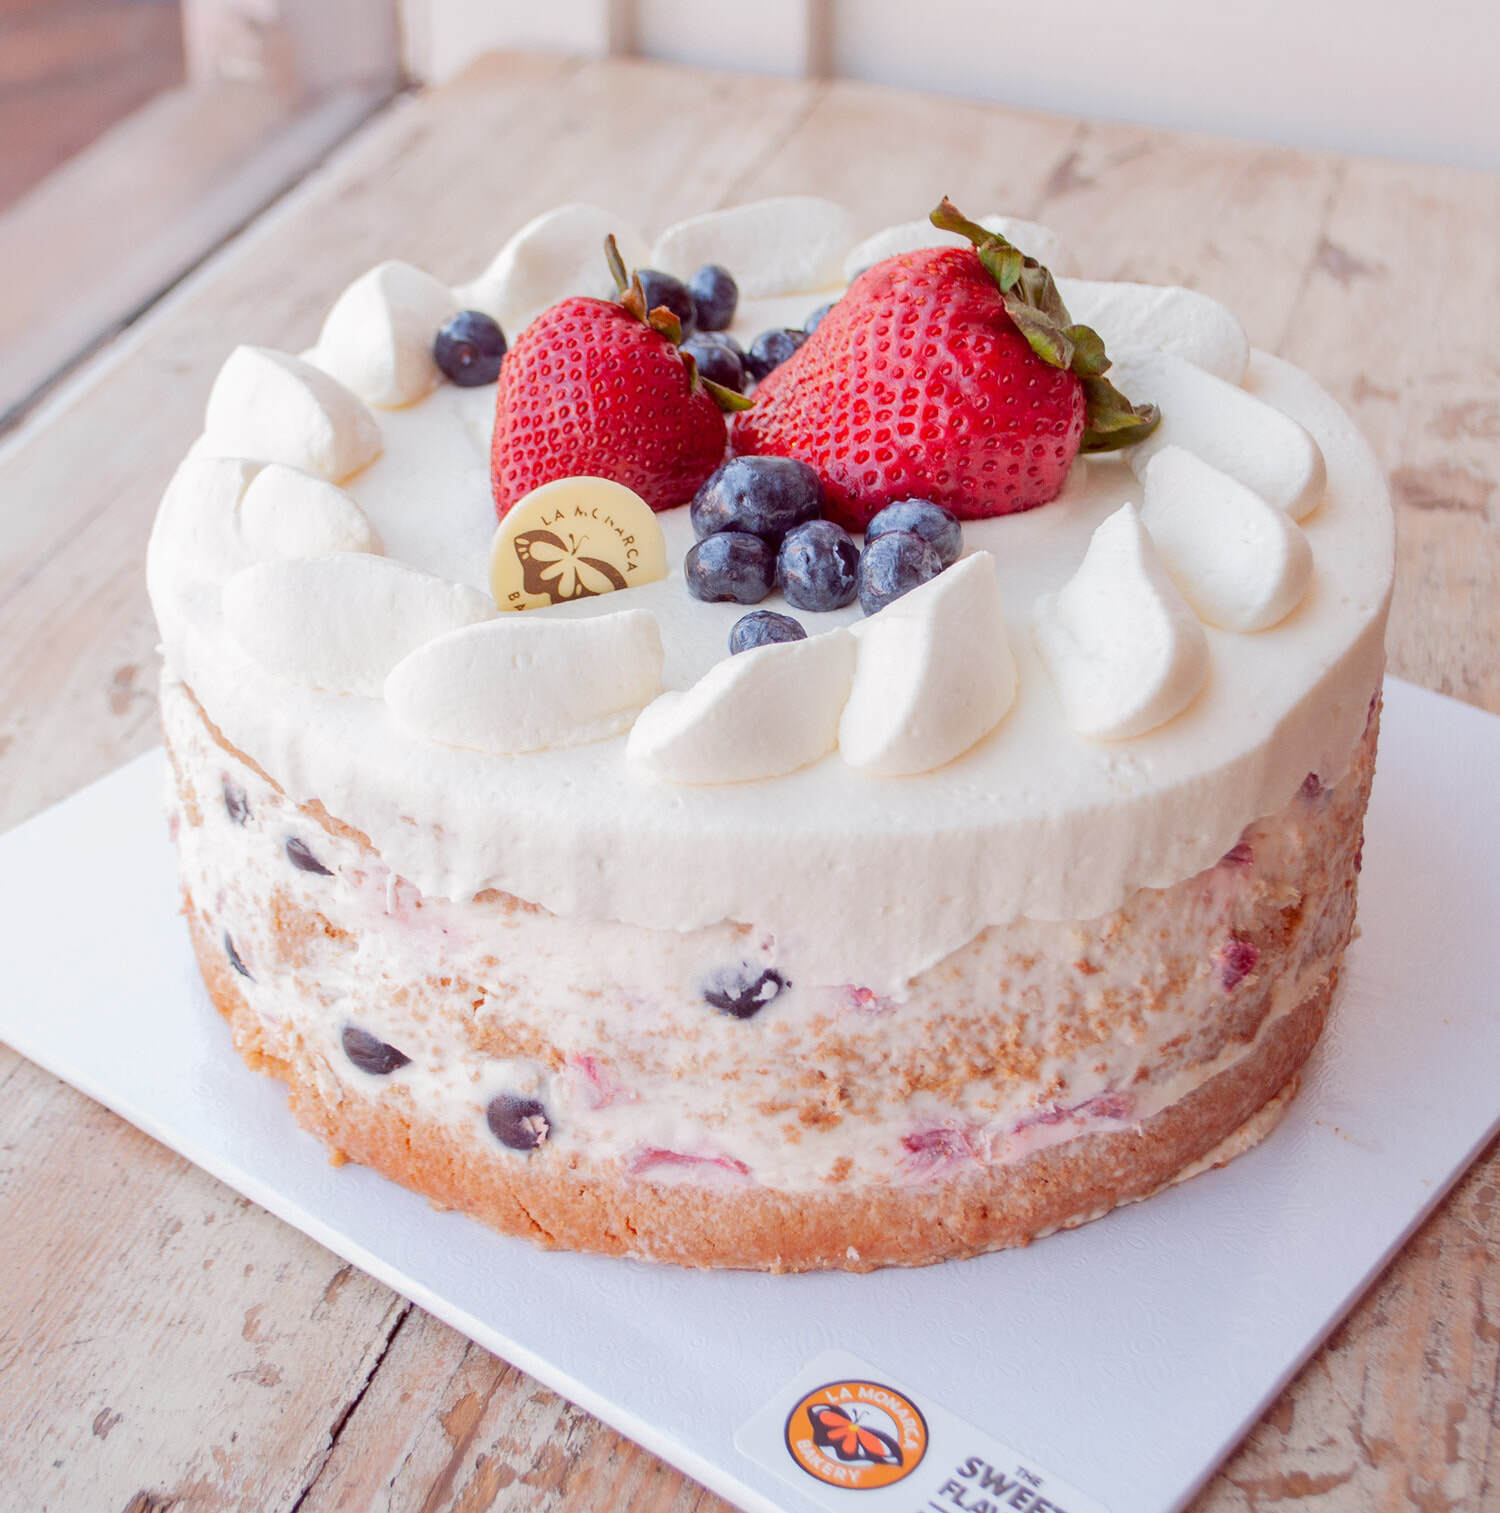 Fruit cake. - Le Delice - The French Bakery | Facebook